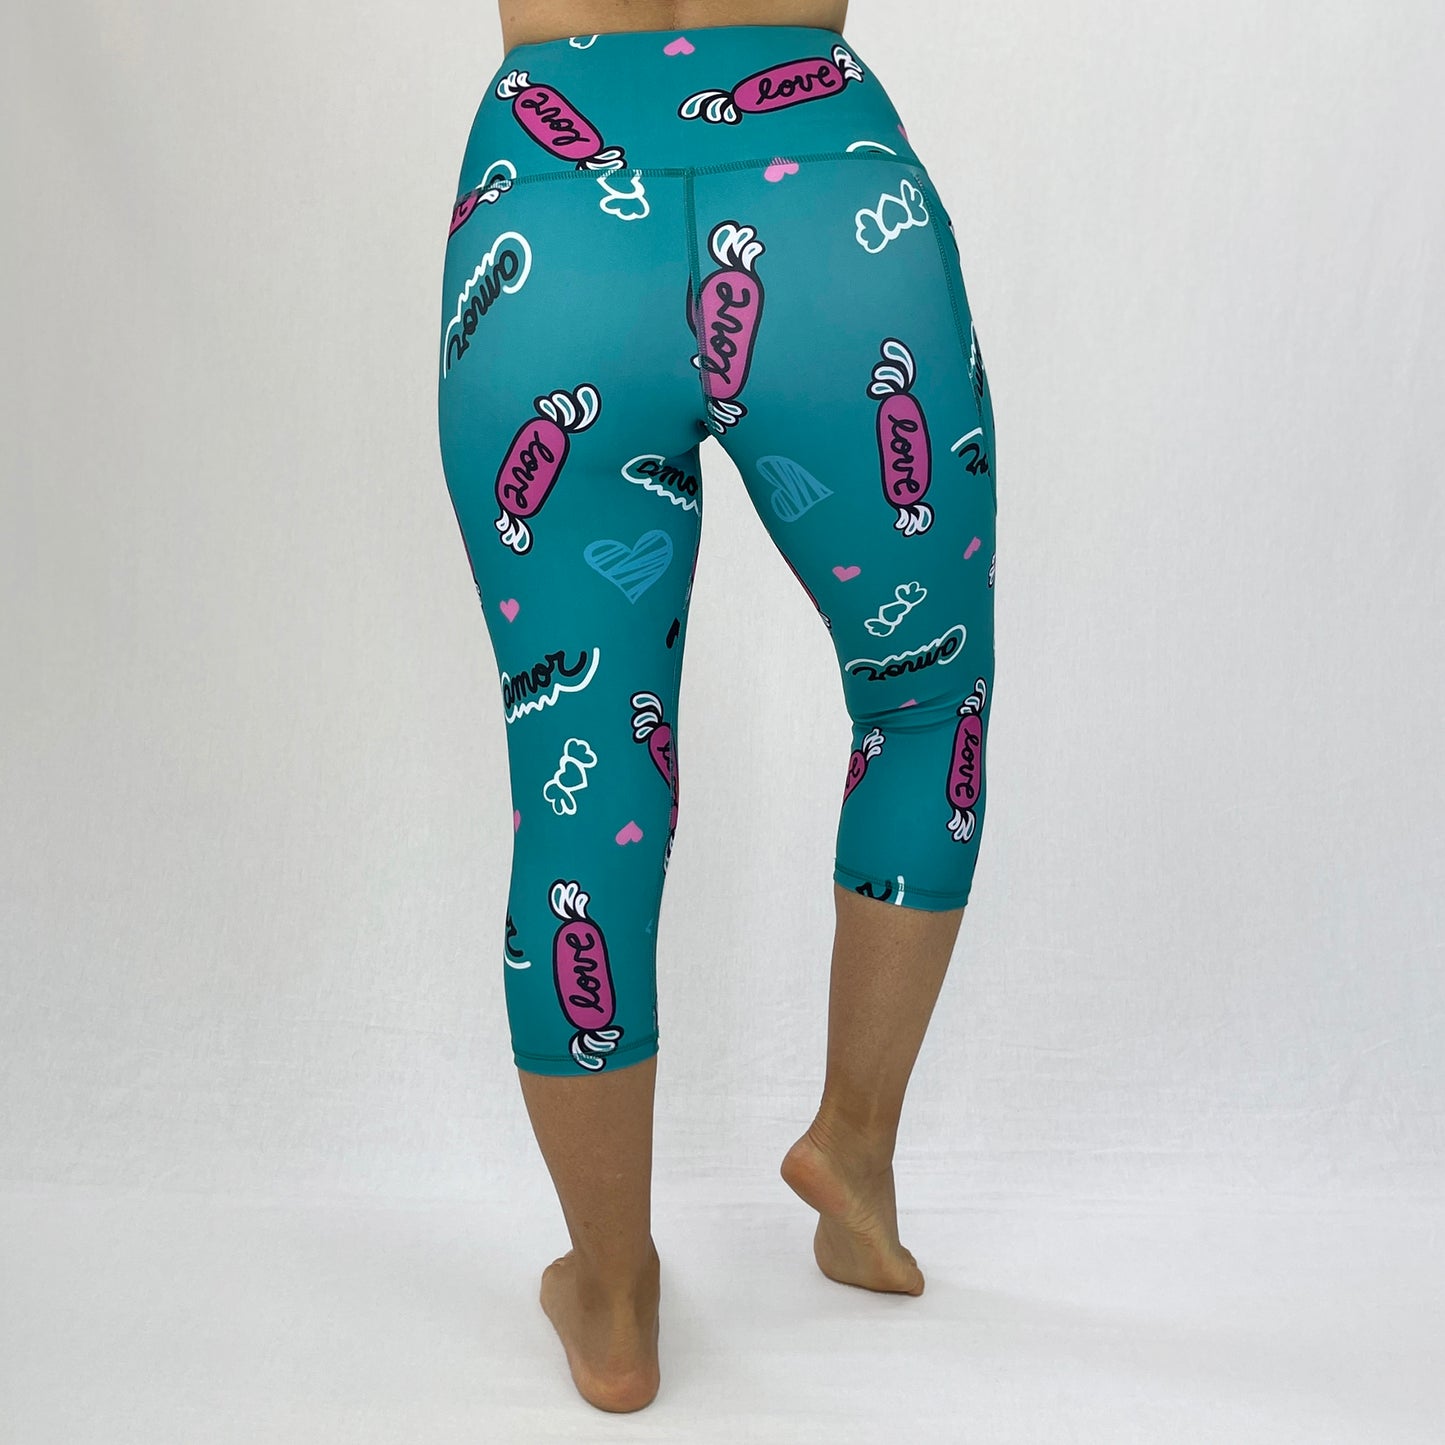 Ethical High Waisted 3/4 length Leggings Oda in Love by Monique Baqués back